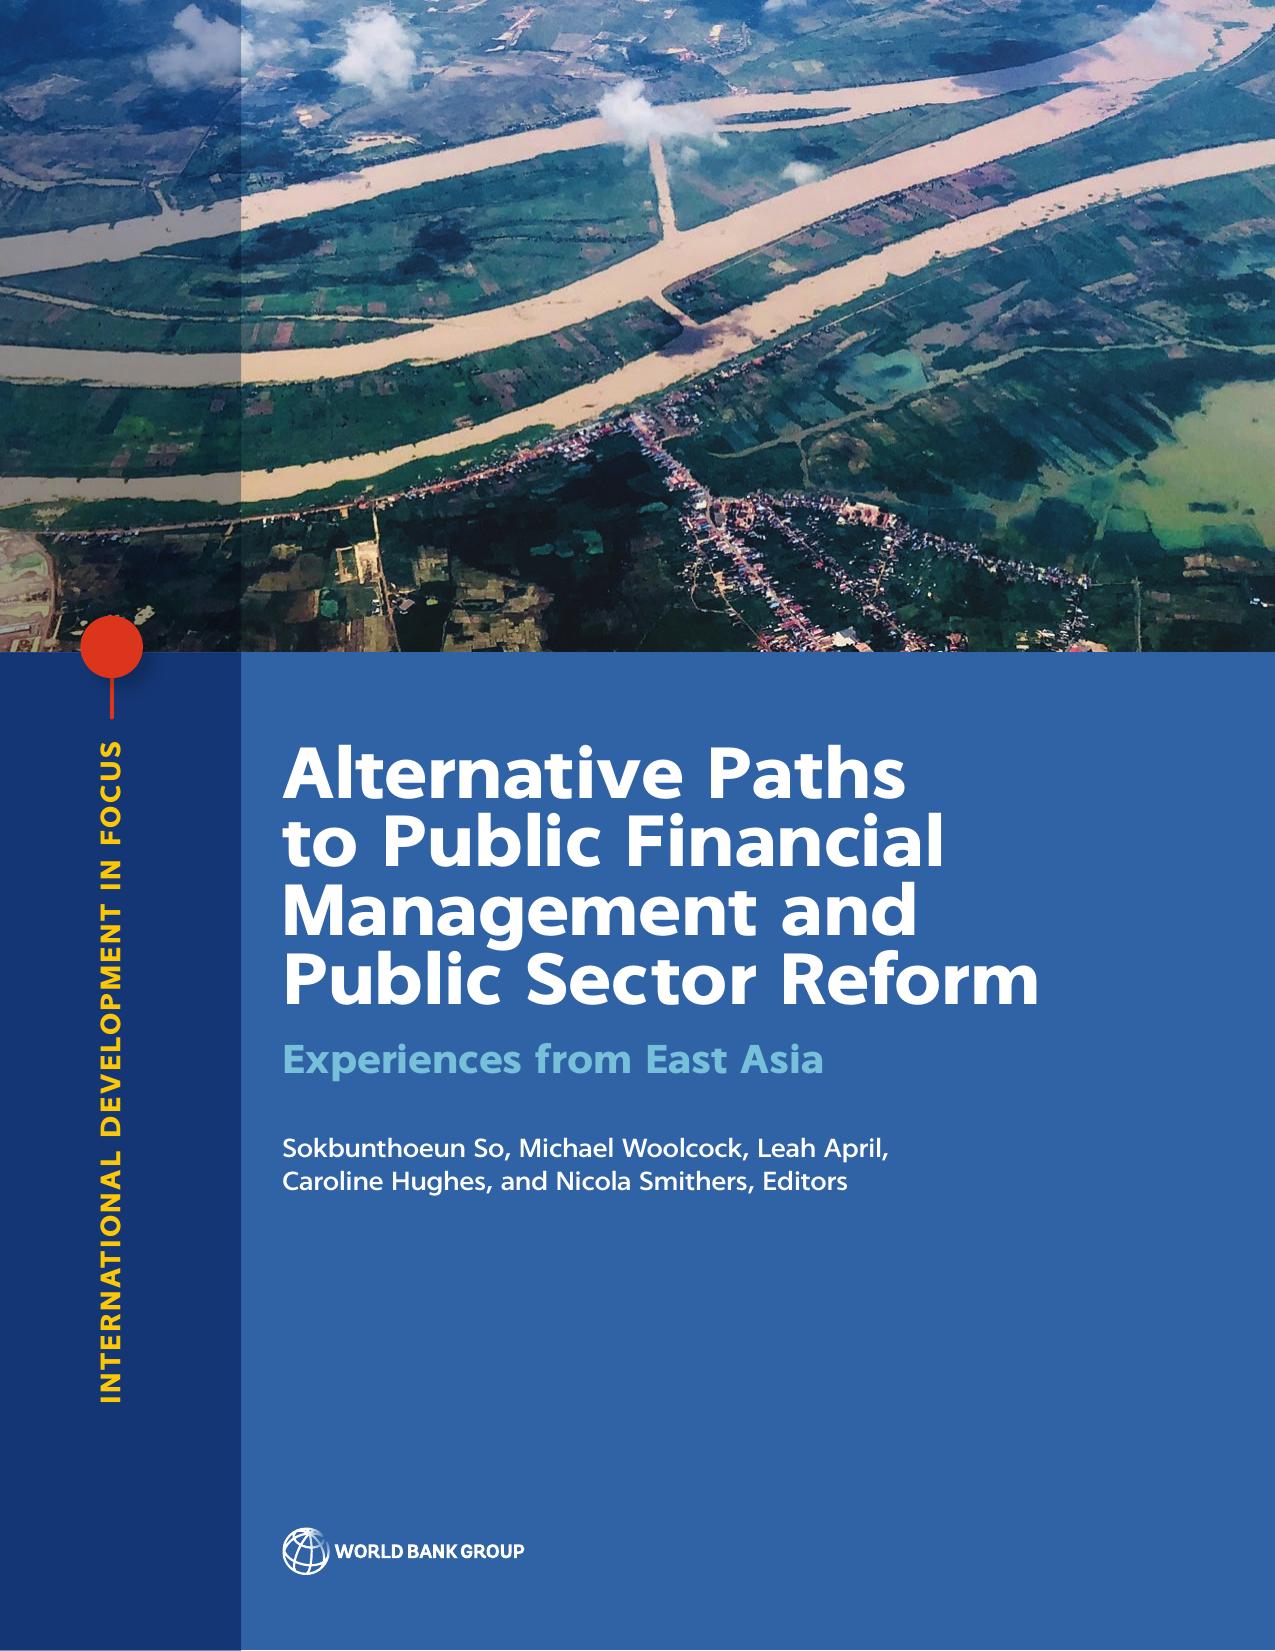 Alternative Paths to Public Financial Management and Public Sector Reform